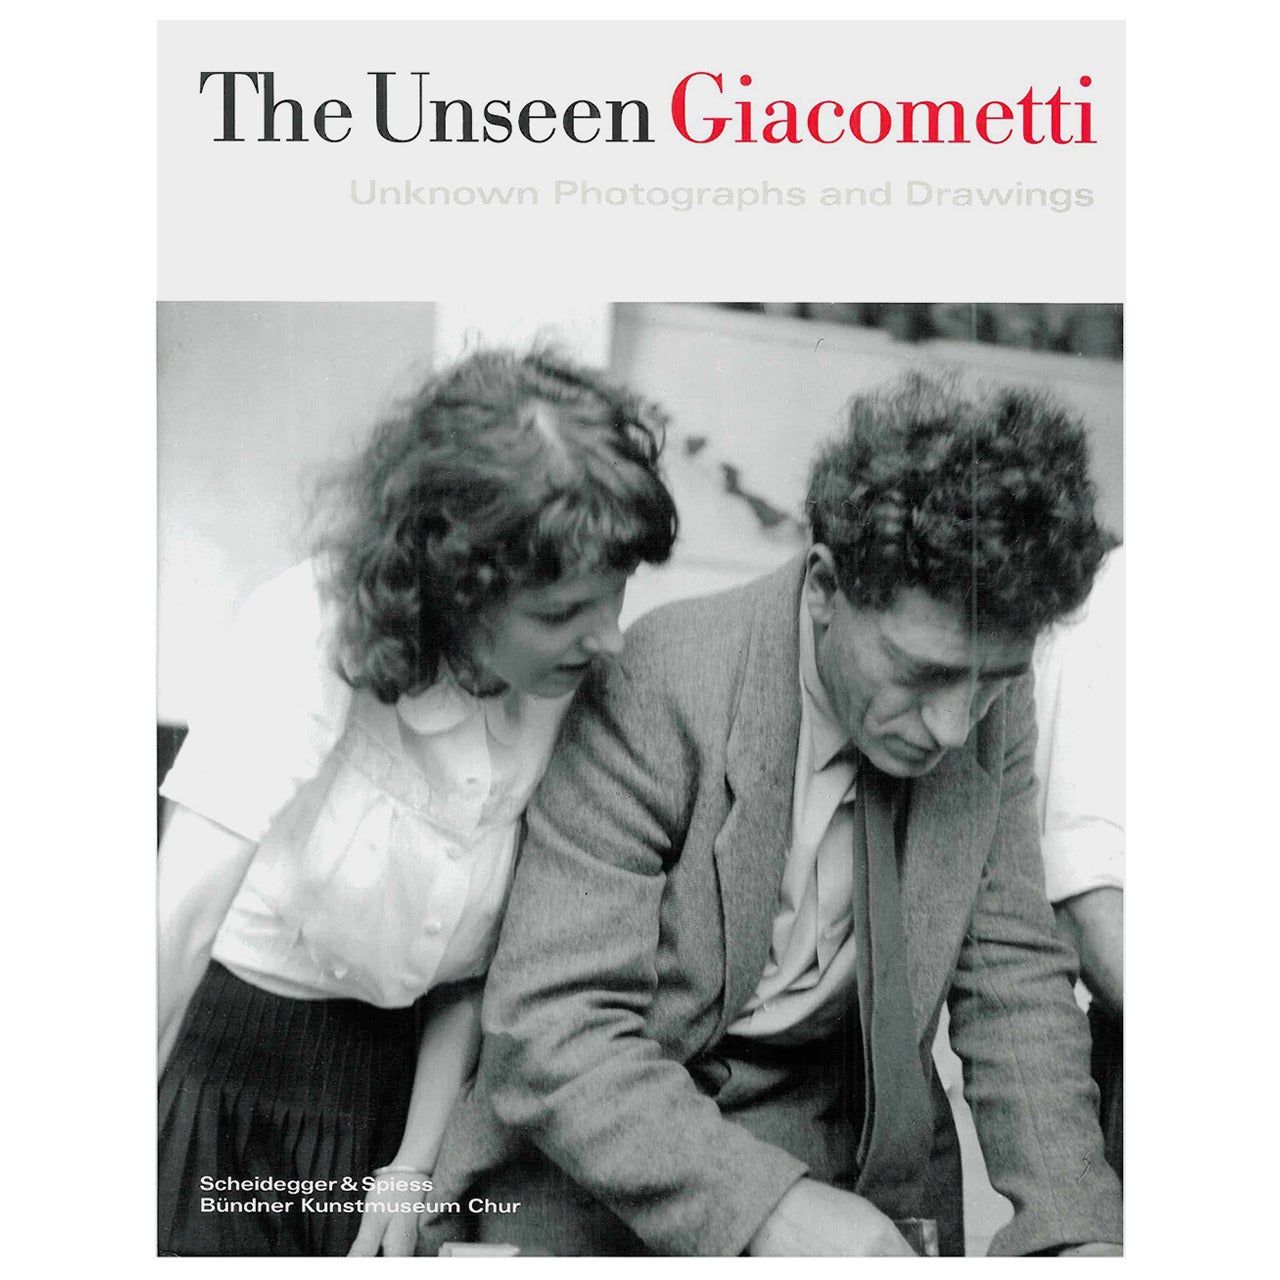 "The Unseen Giacometti - Unknown Photographs and Drawings" Book